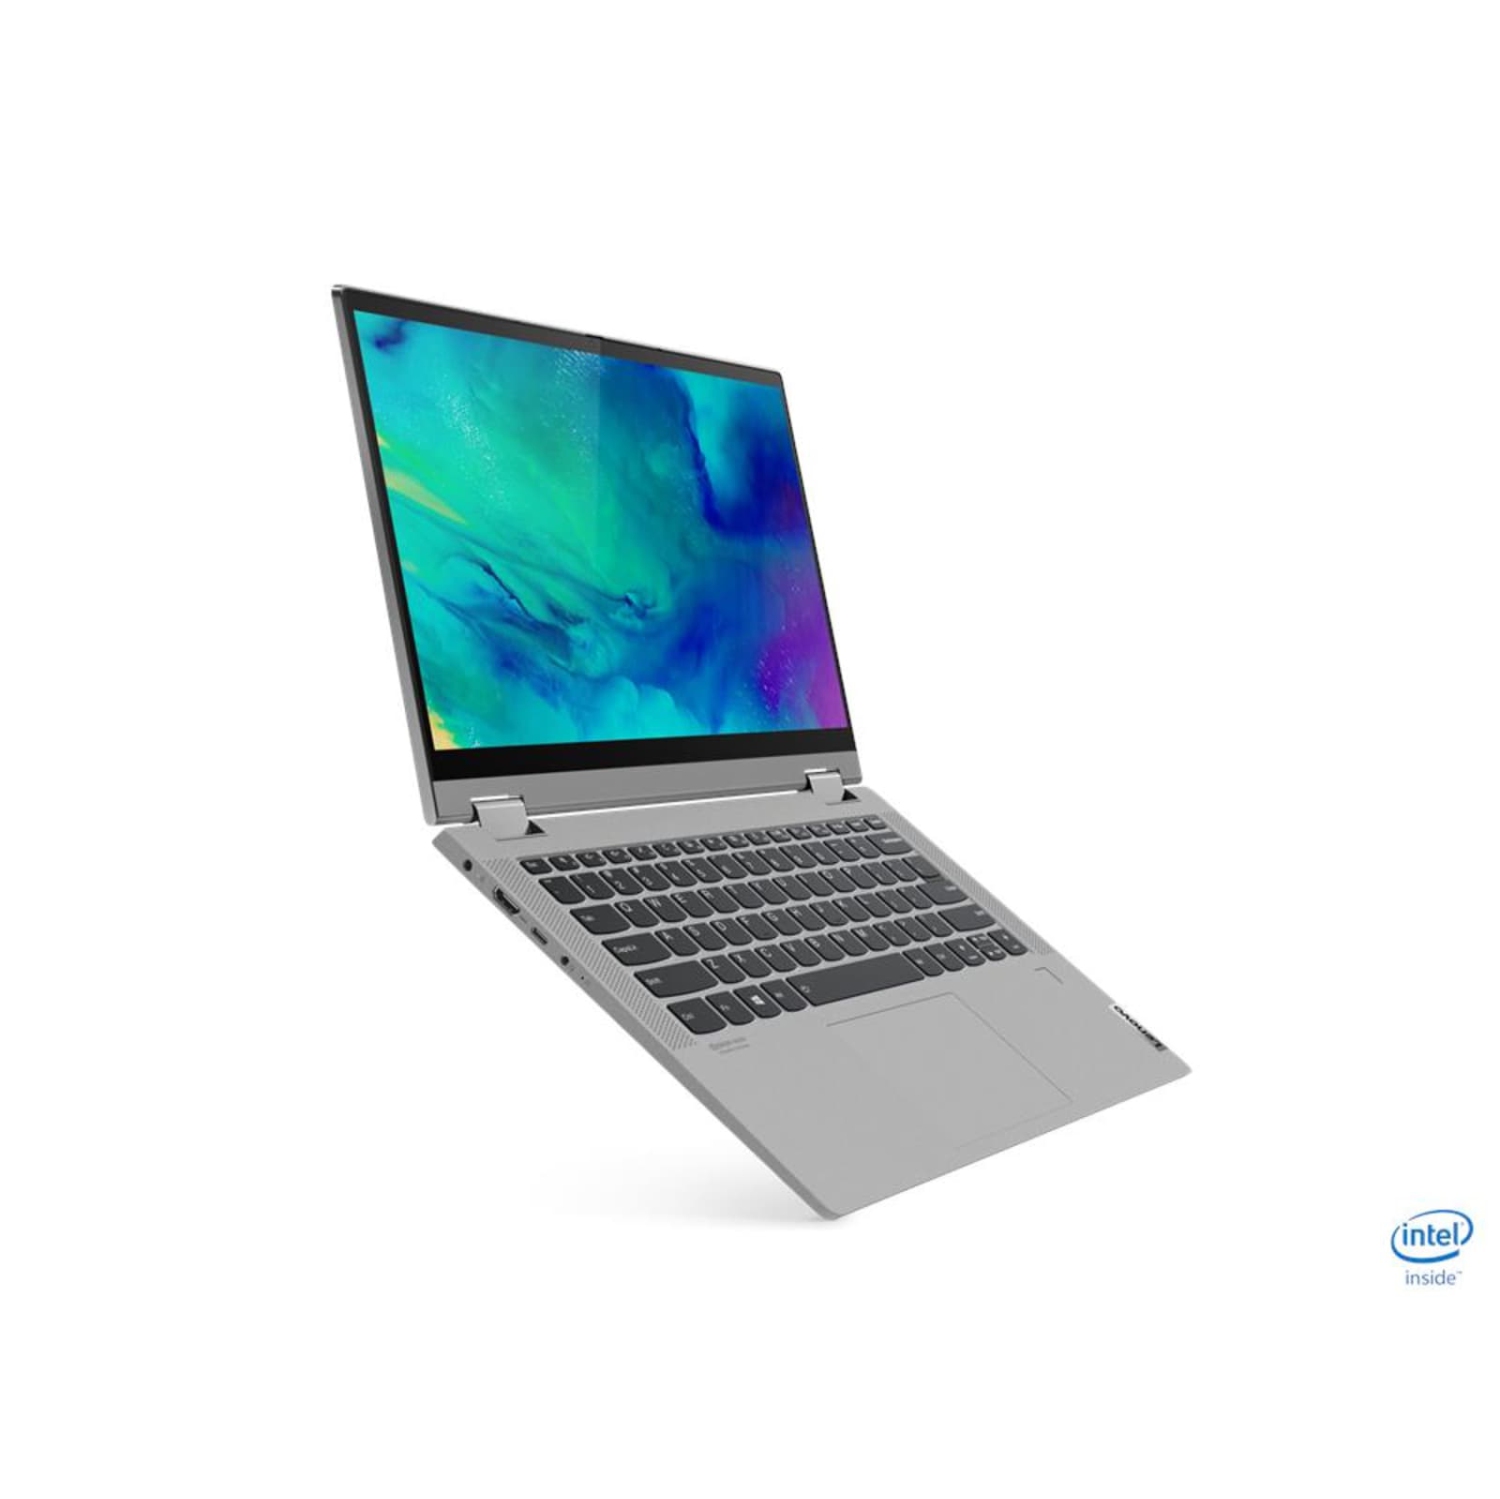 Refurbished (Excellent) Lenovo IdeaPad Flex 5 14ITL05 2-in-1 Laptop | 14" 1920x1080 FHD | Core i3-1115G4 - 256GB SSD Hard Drive - 8GB RAM | 2 cores @ 4.1 GHz Win 10 Home Silver